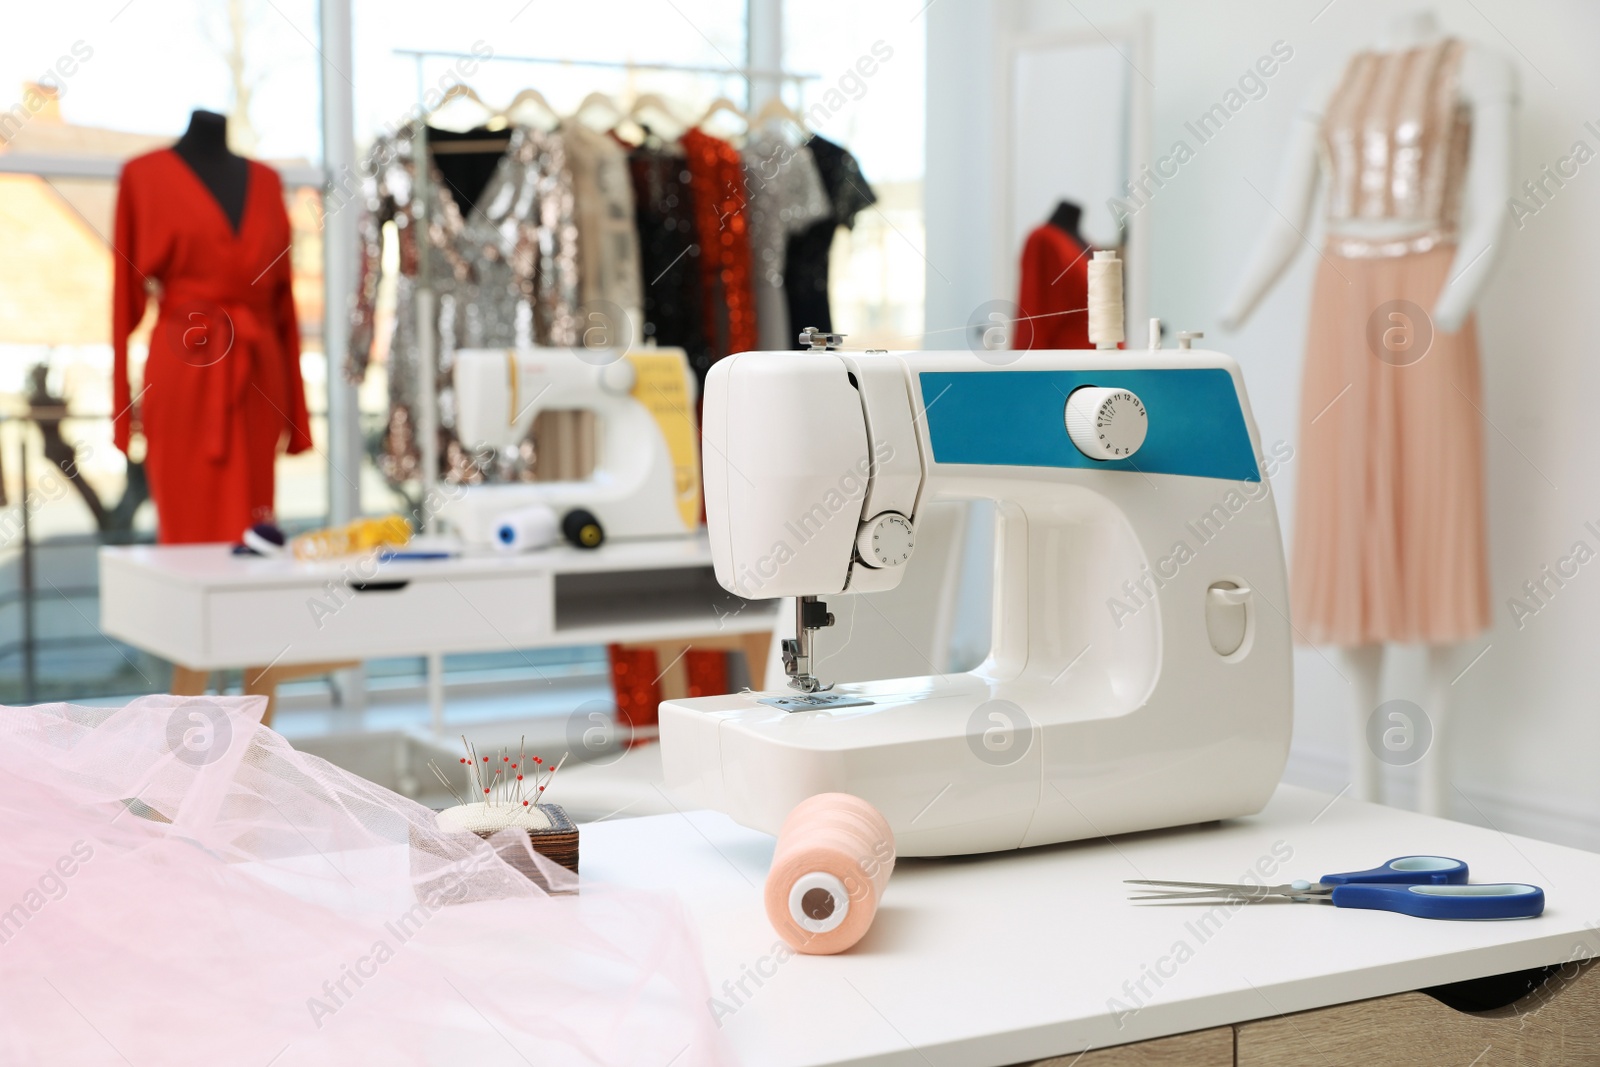 Photo of Sewing machine and equipment on table in dressmaking workshop